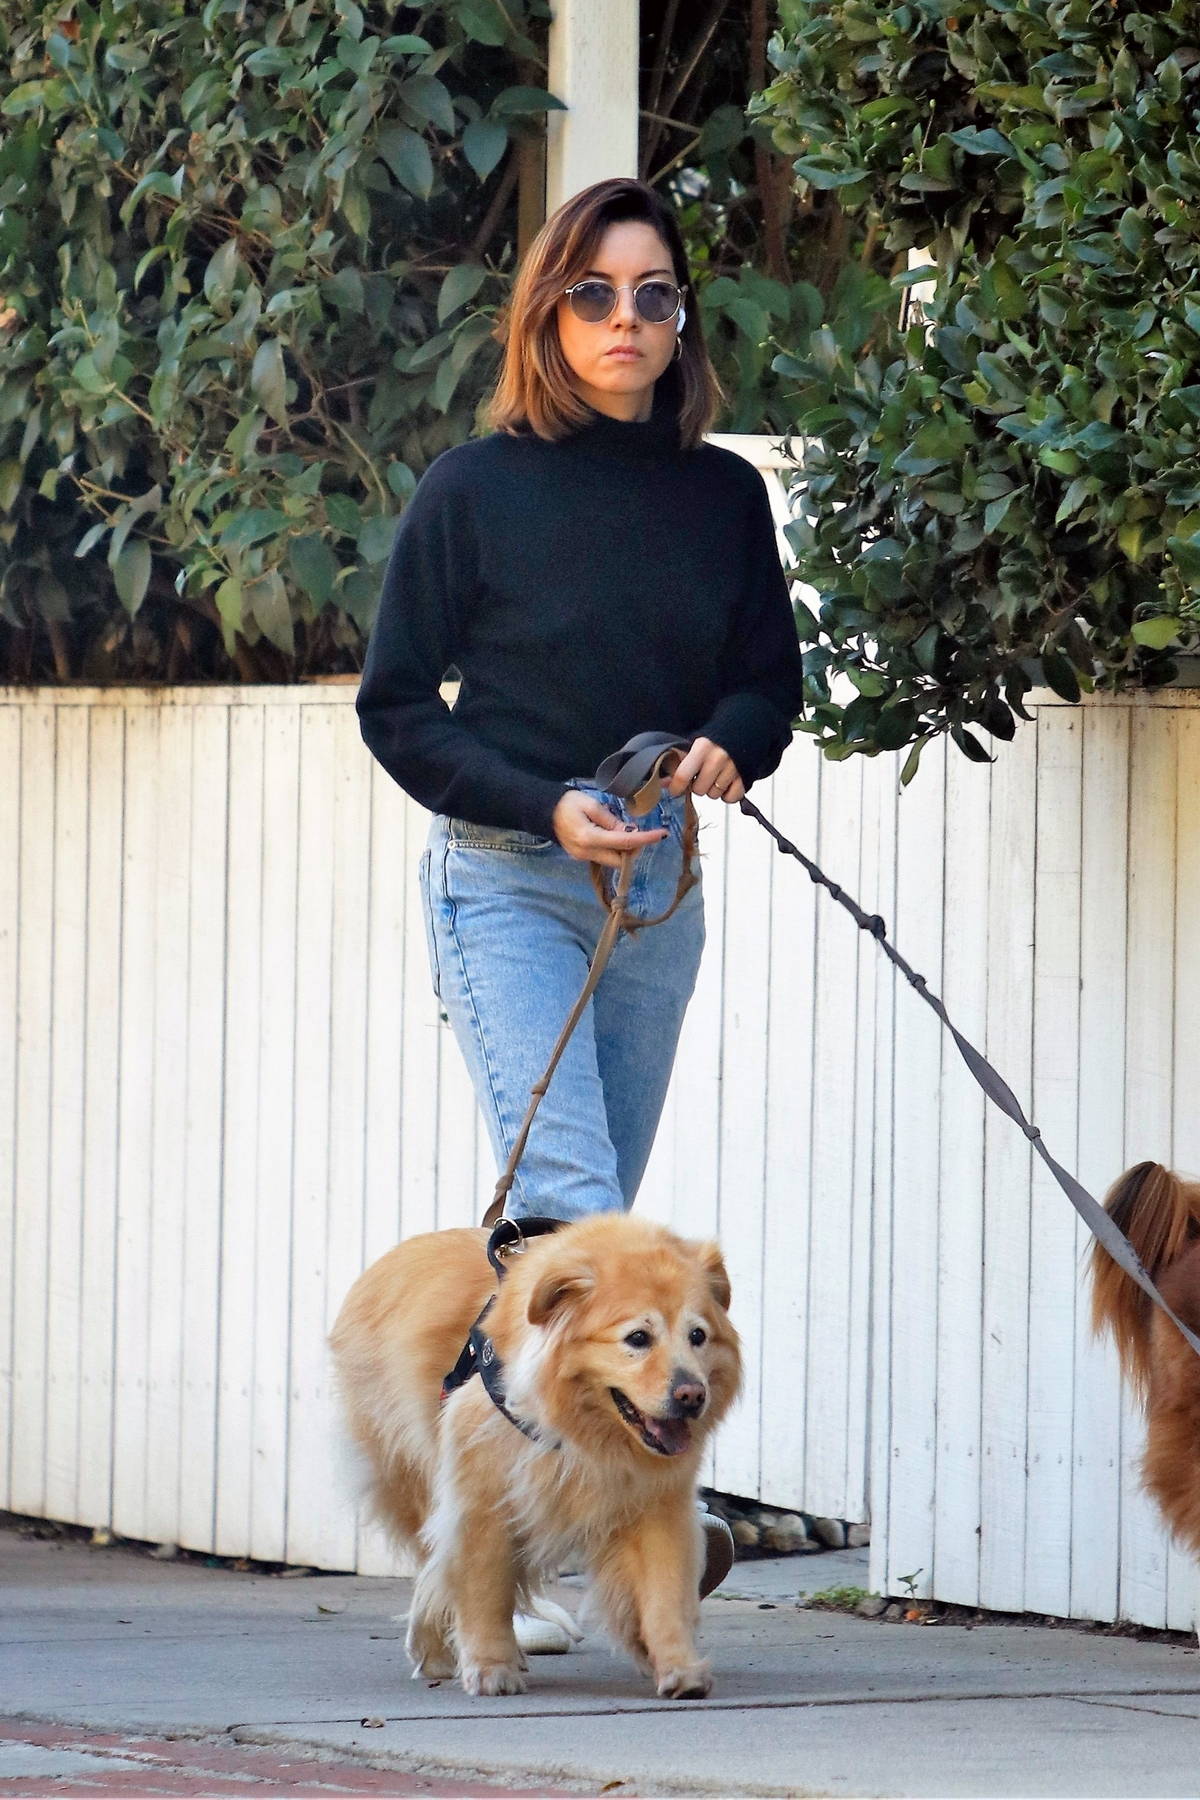 Aubrey Plaza takes her dogs out for a walk in Los Feliz, California